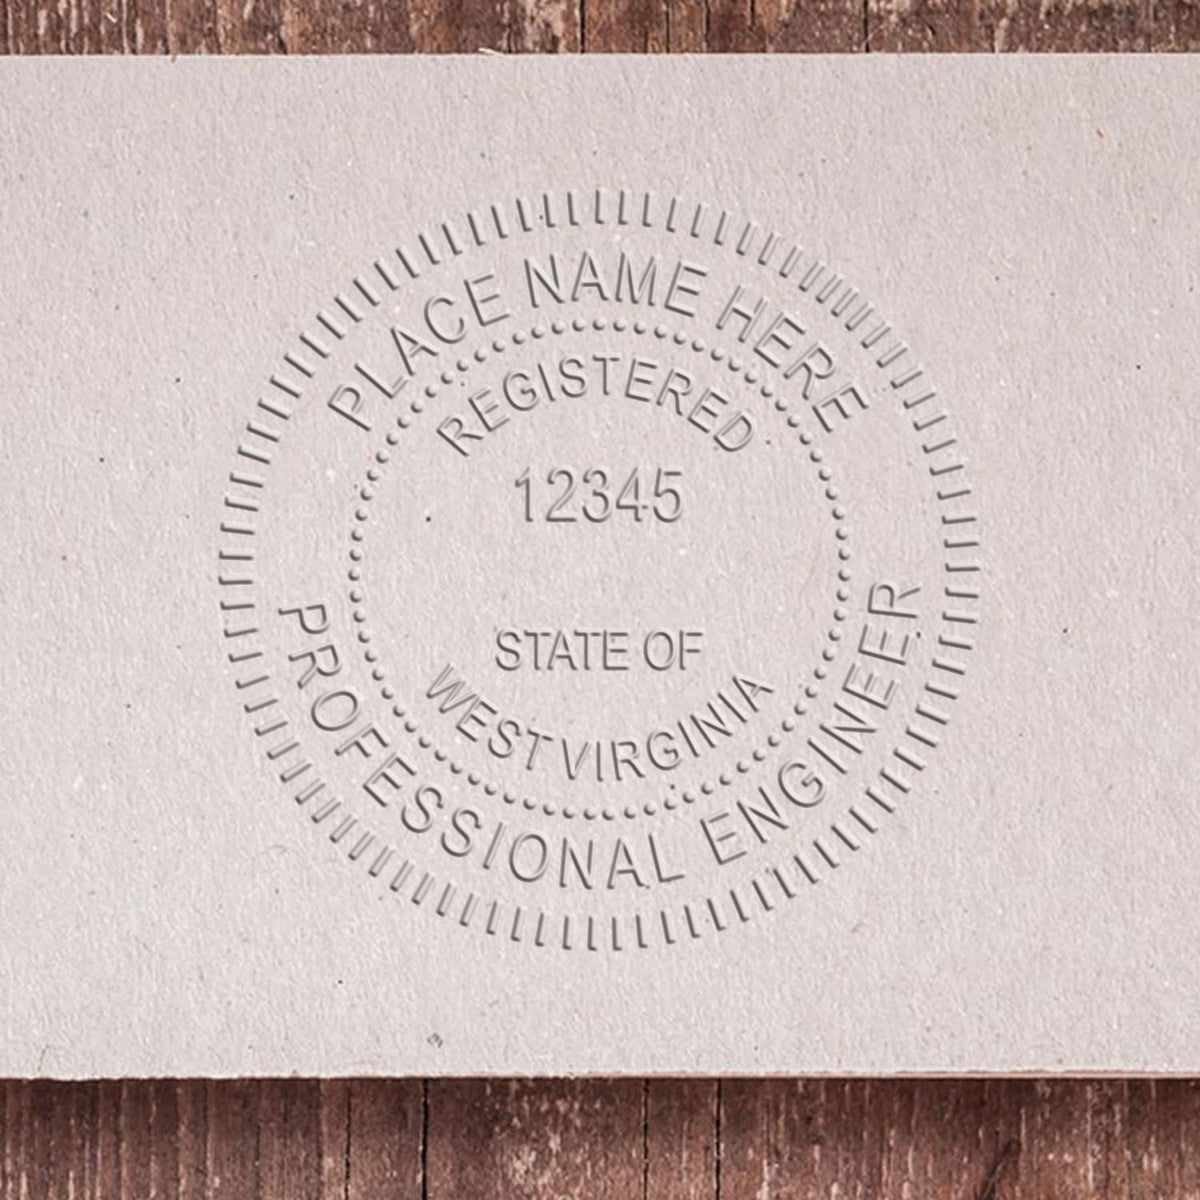 The State of West Virginia Extended Long Reach Engineer Seal stamp impression comes to life with a crisp, detailed photo on paper - showcasing true professional quality.